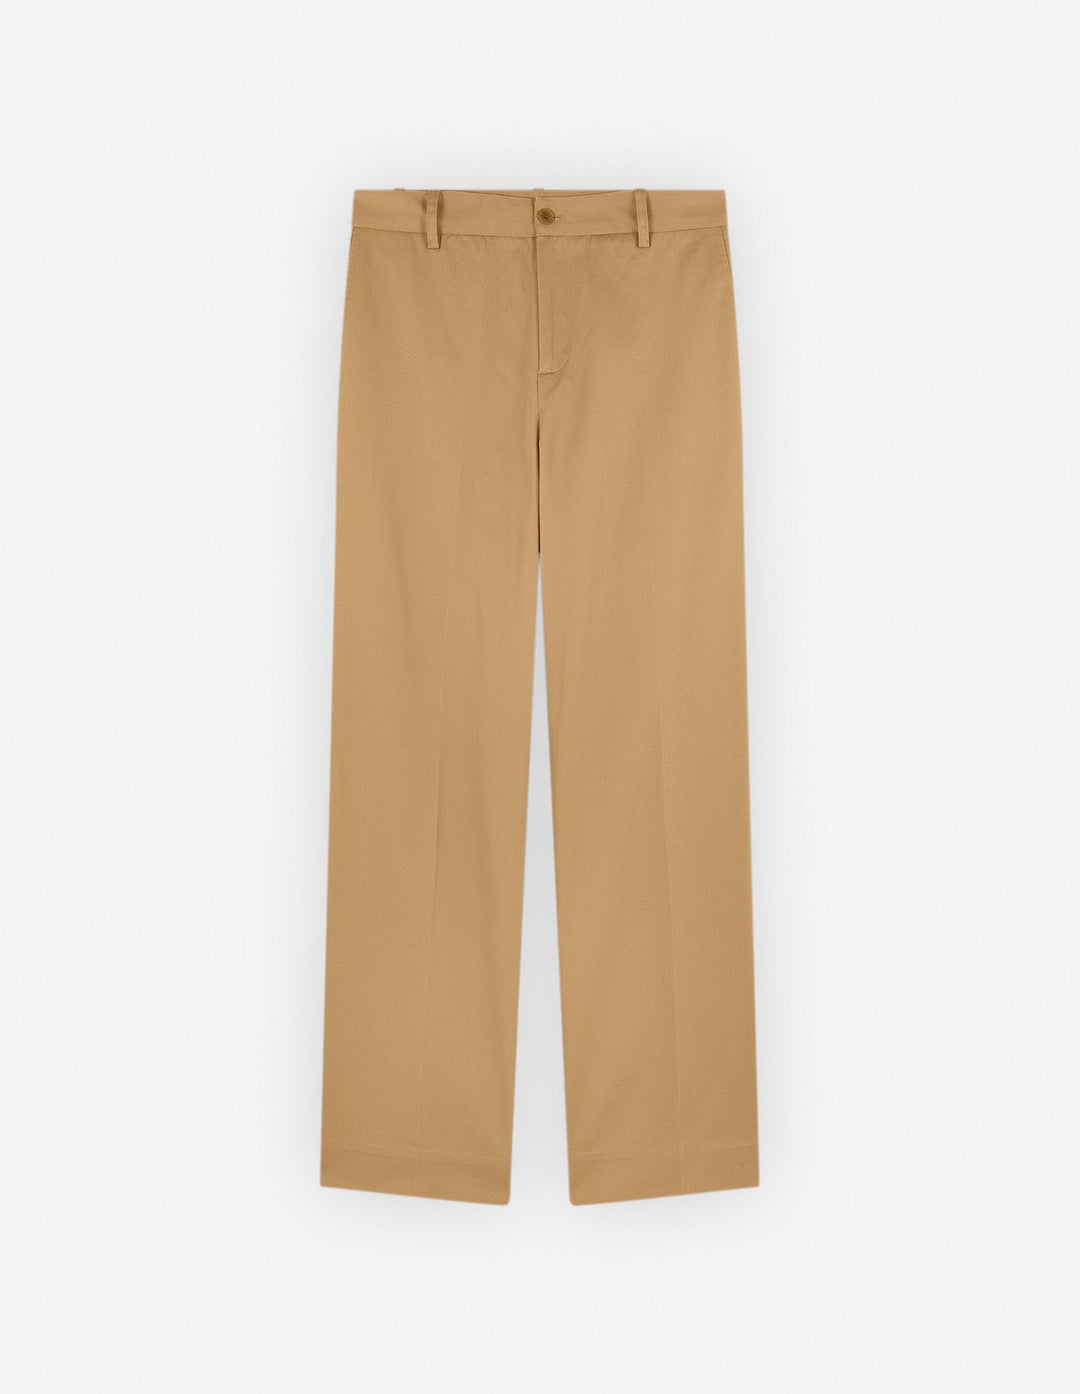 WIDE LEG CHINO PANTS IN COTTON WITH LOGO HANDWRITING